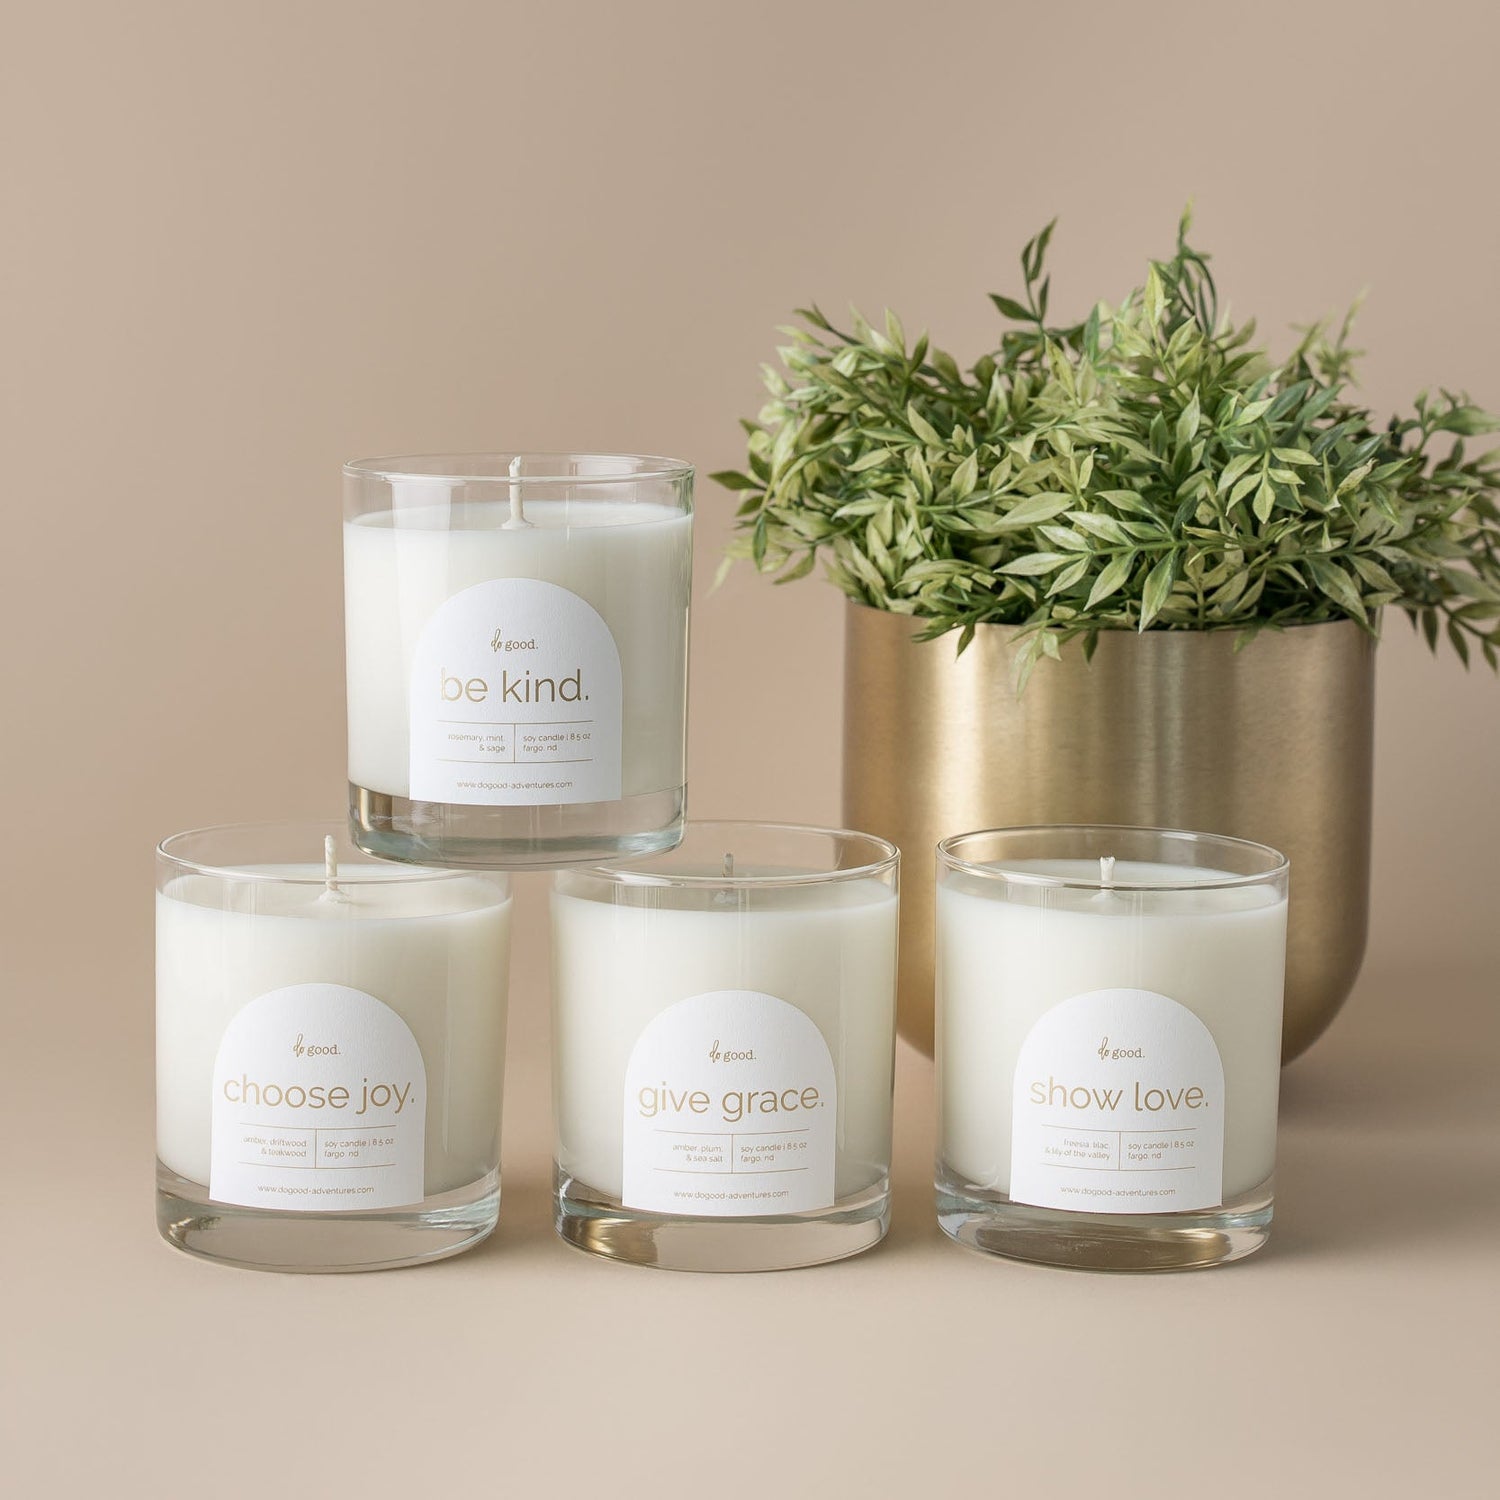 Image of the four candles in the do good collection: be kind./choose joy./give grace./show love.